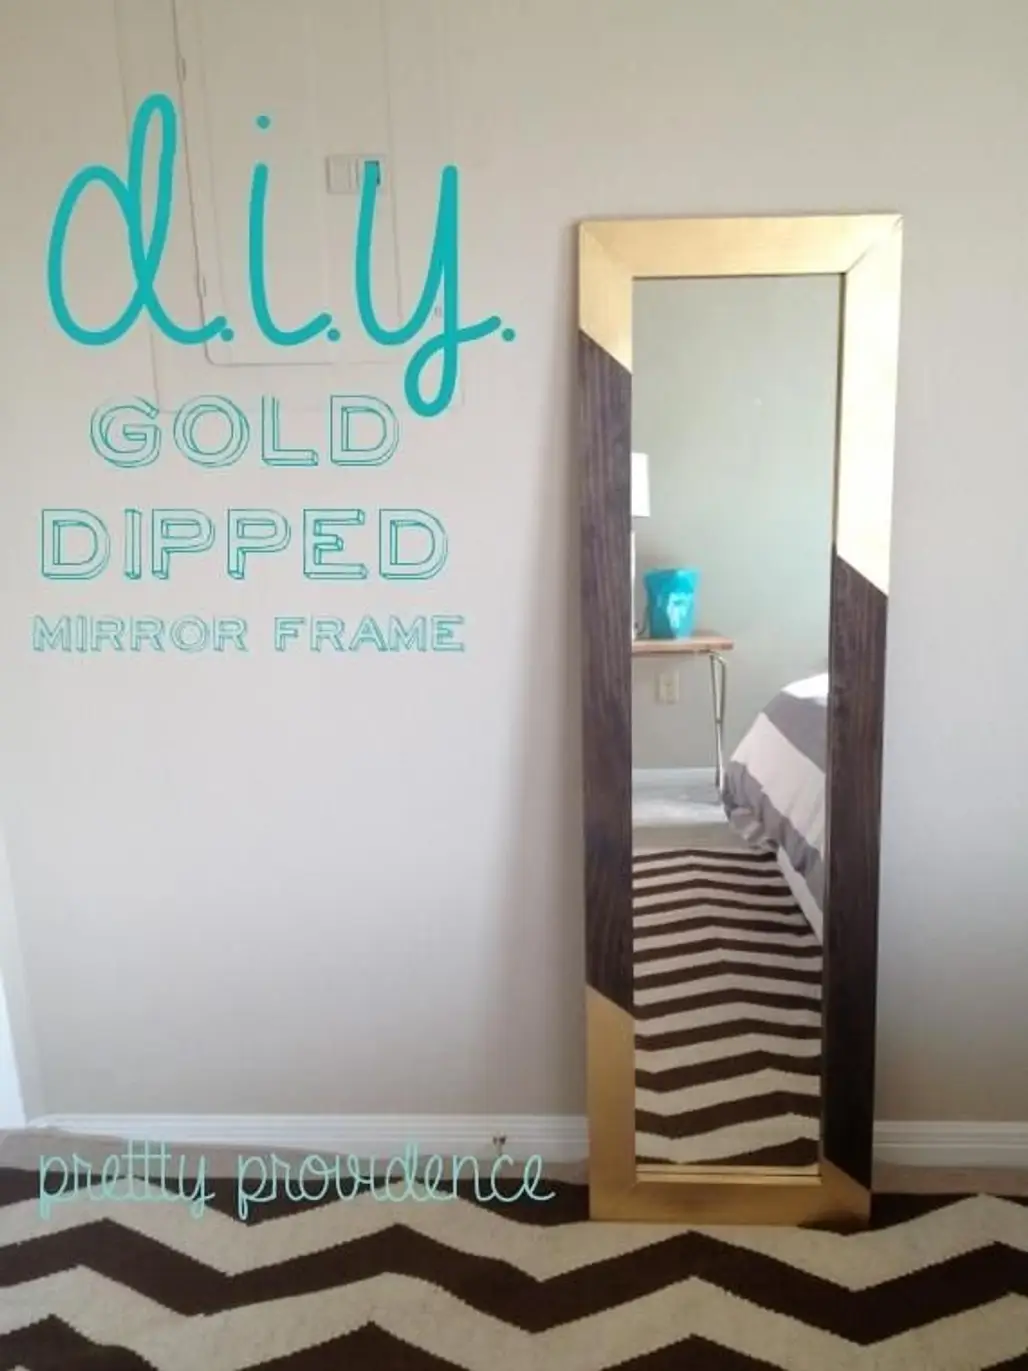 Gold-dipped Mirror Frame